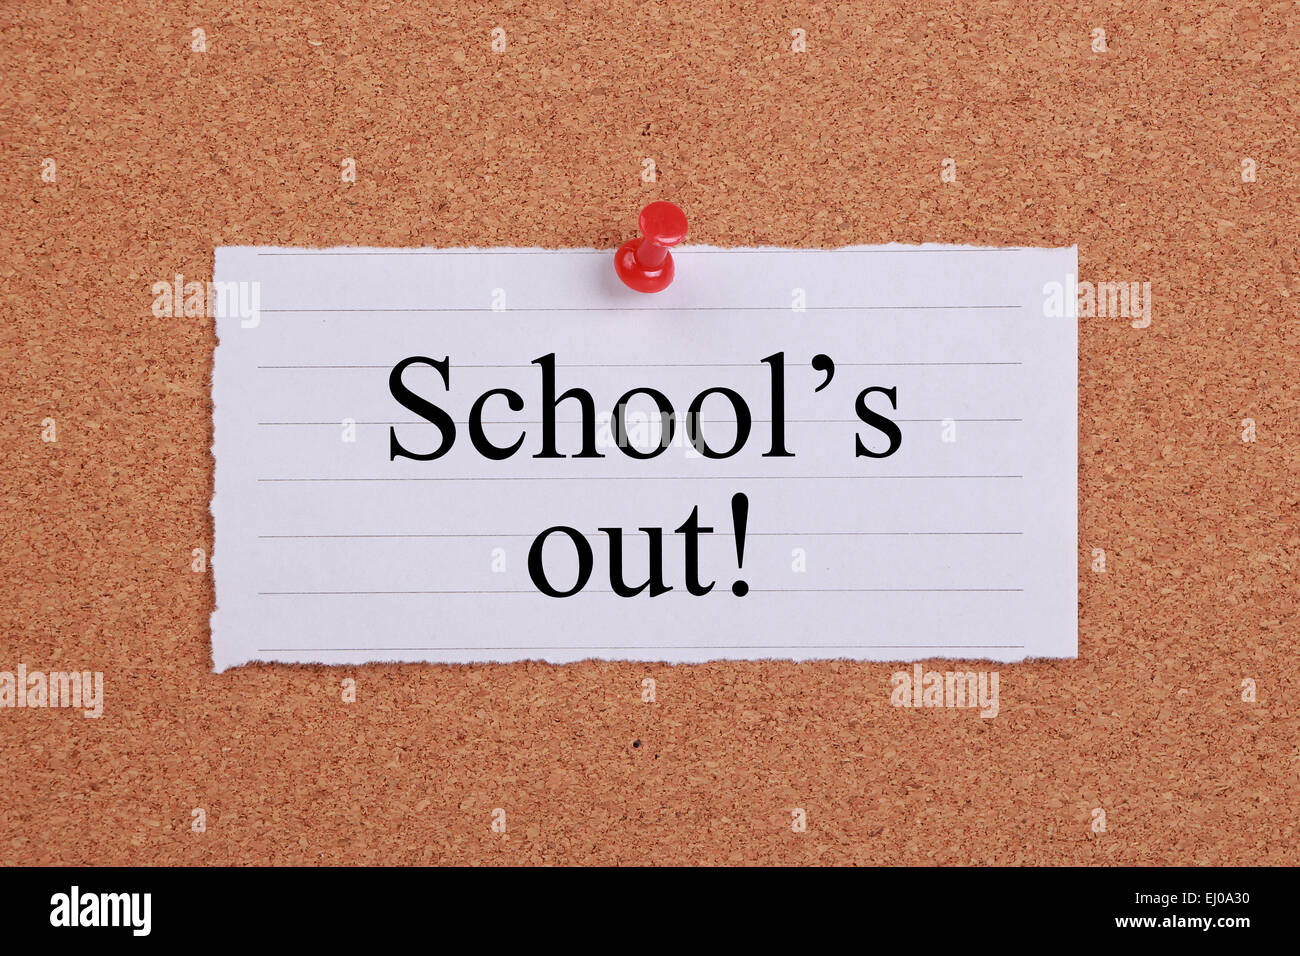 'School's out' note pinned on cork. Stock Photo